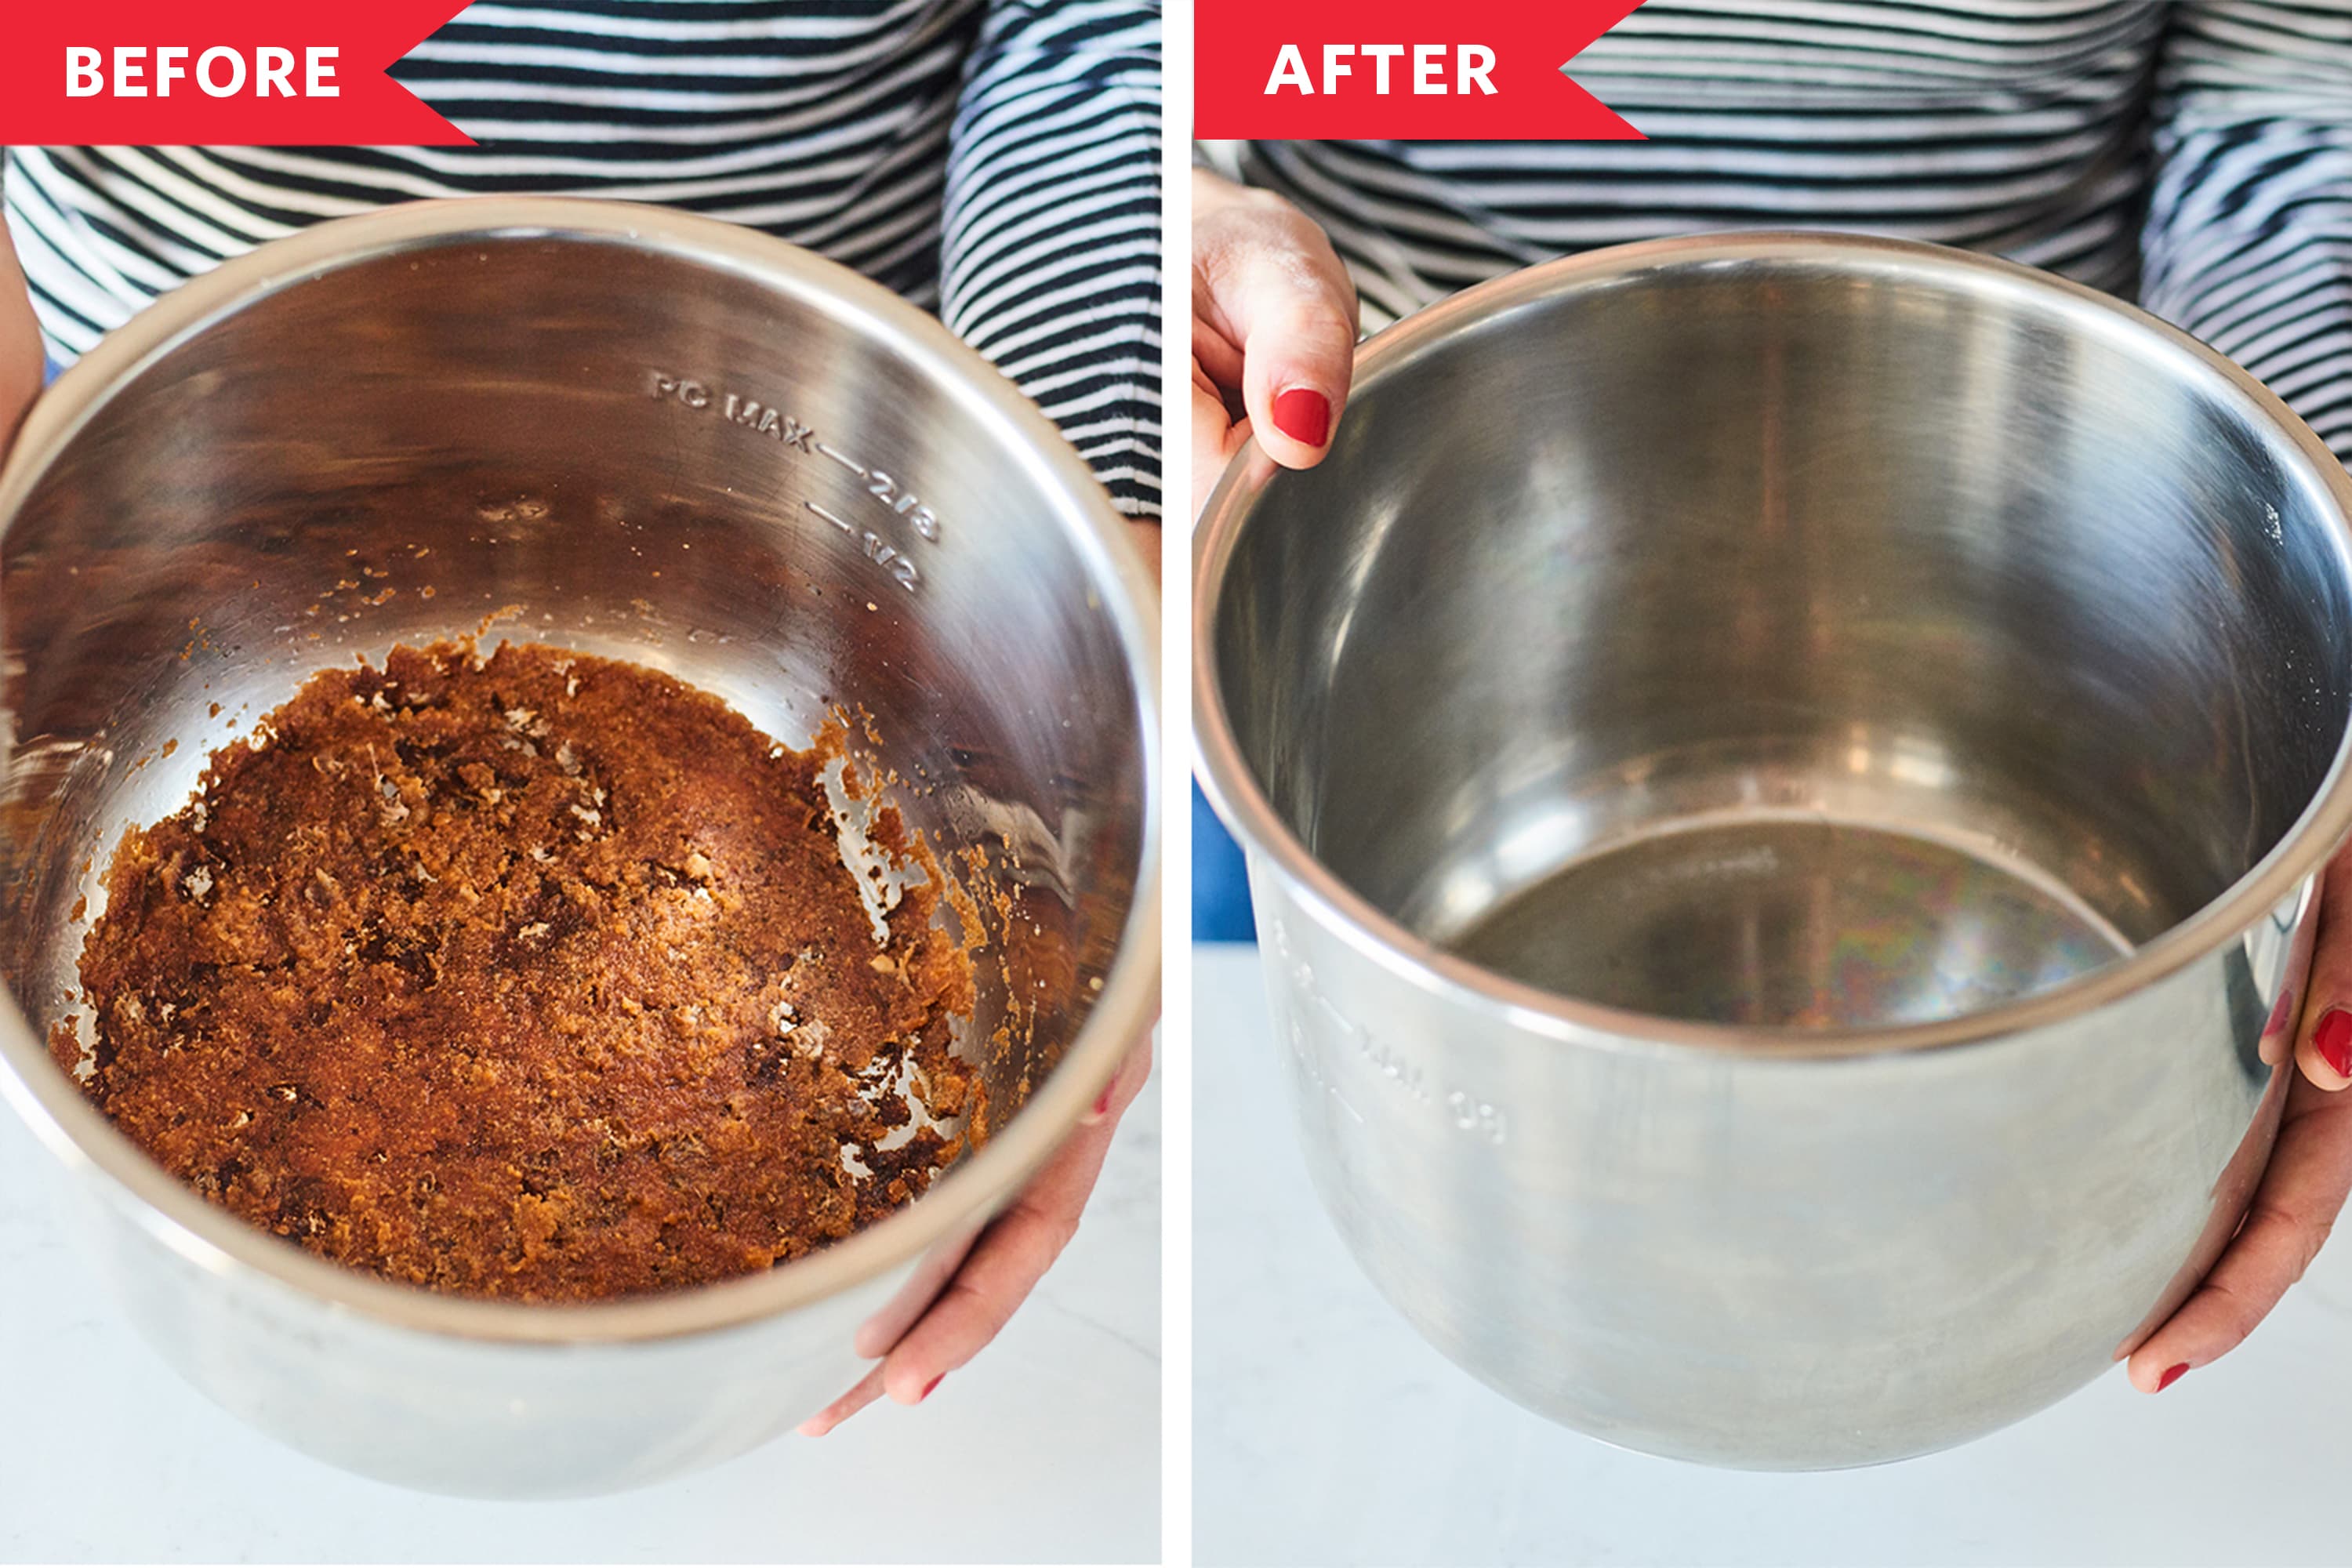 https://cdn.apartmenttherapy.info/image/upload/v1579906968/k/Photo/Lifestyle/2020-02-How-To-Clean-Burnt-Instant-Pot-Liner/Lifestyle-How-to-Get-Your-Instant-Pot-Liner-Looking-Good-as-New_diptych_beforeafter.jpg